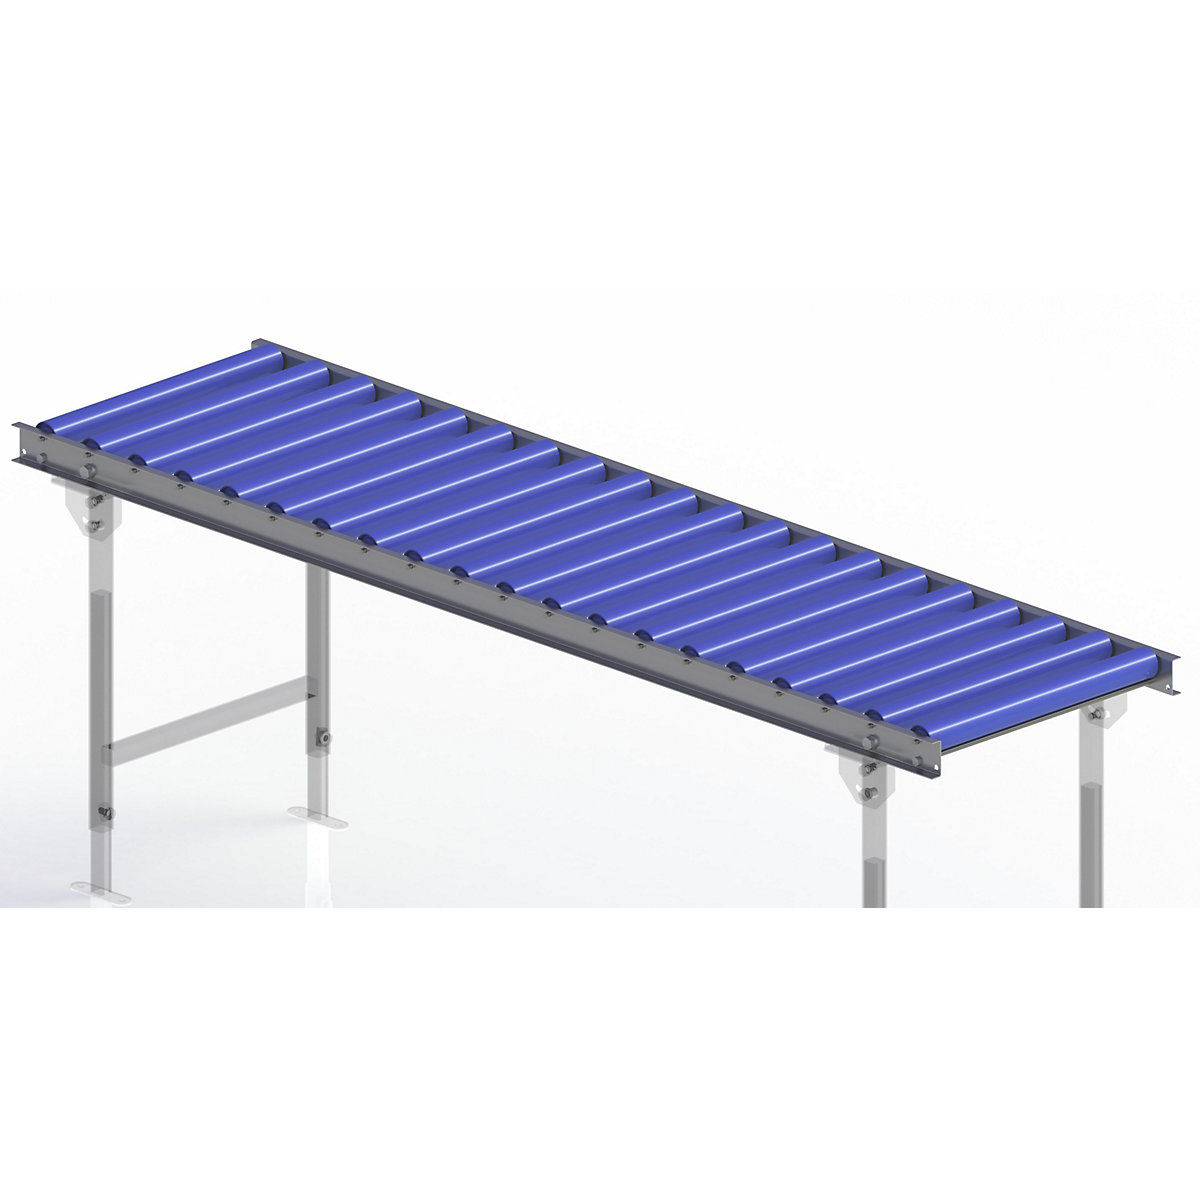 Gura – Light duty roller conveyor, steel frame with plastic rollers, track width 500 mm, axle spacing 100 mm, length 2.0 m